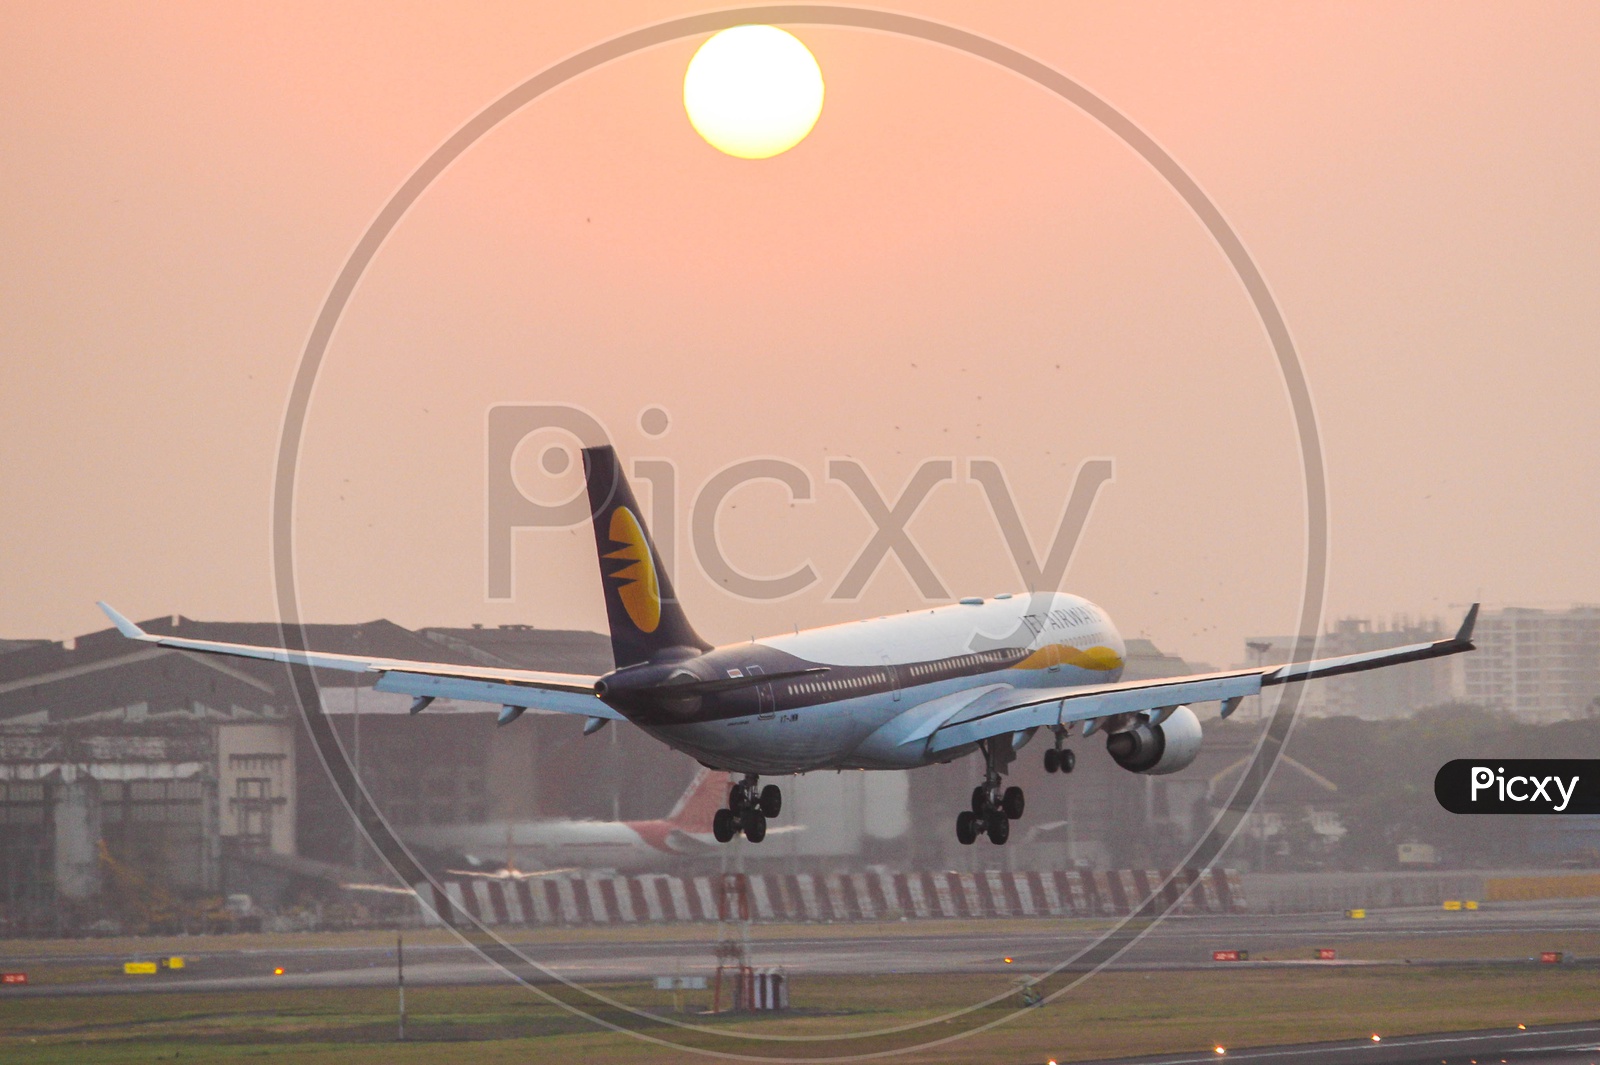 Jet Airways A330 coming in to land at BOM after completing its flight from Chennai.